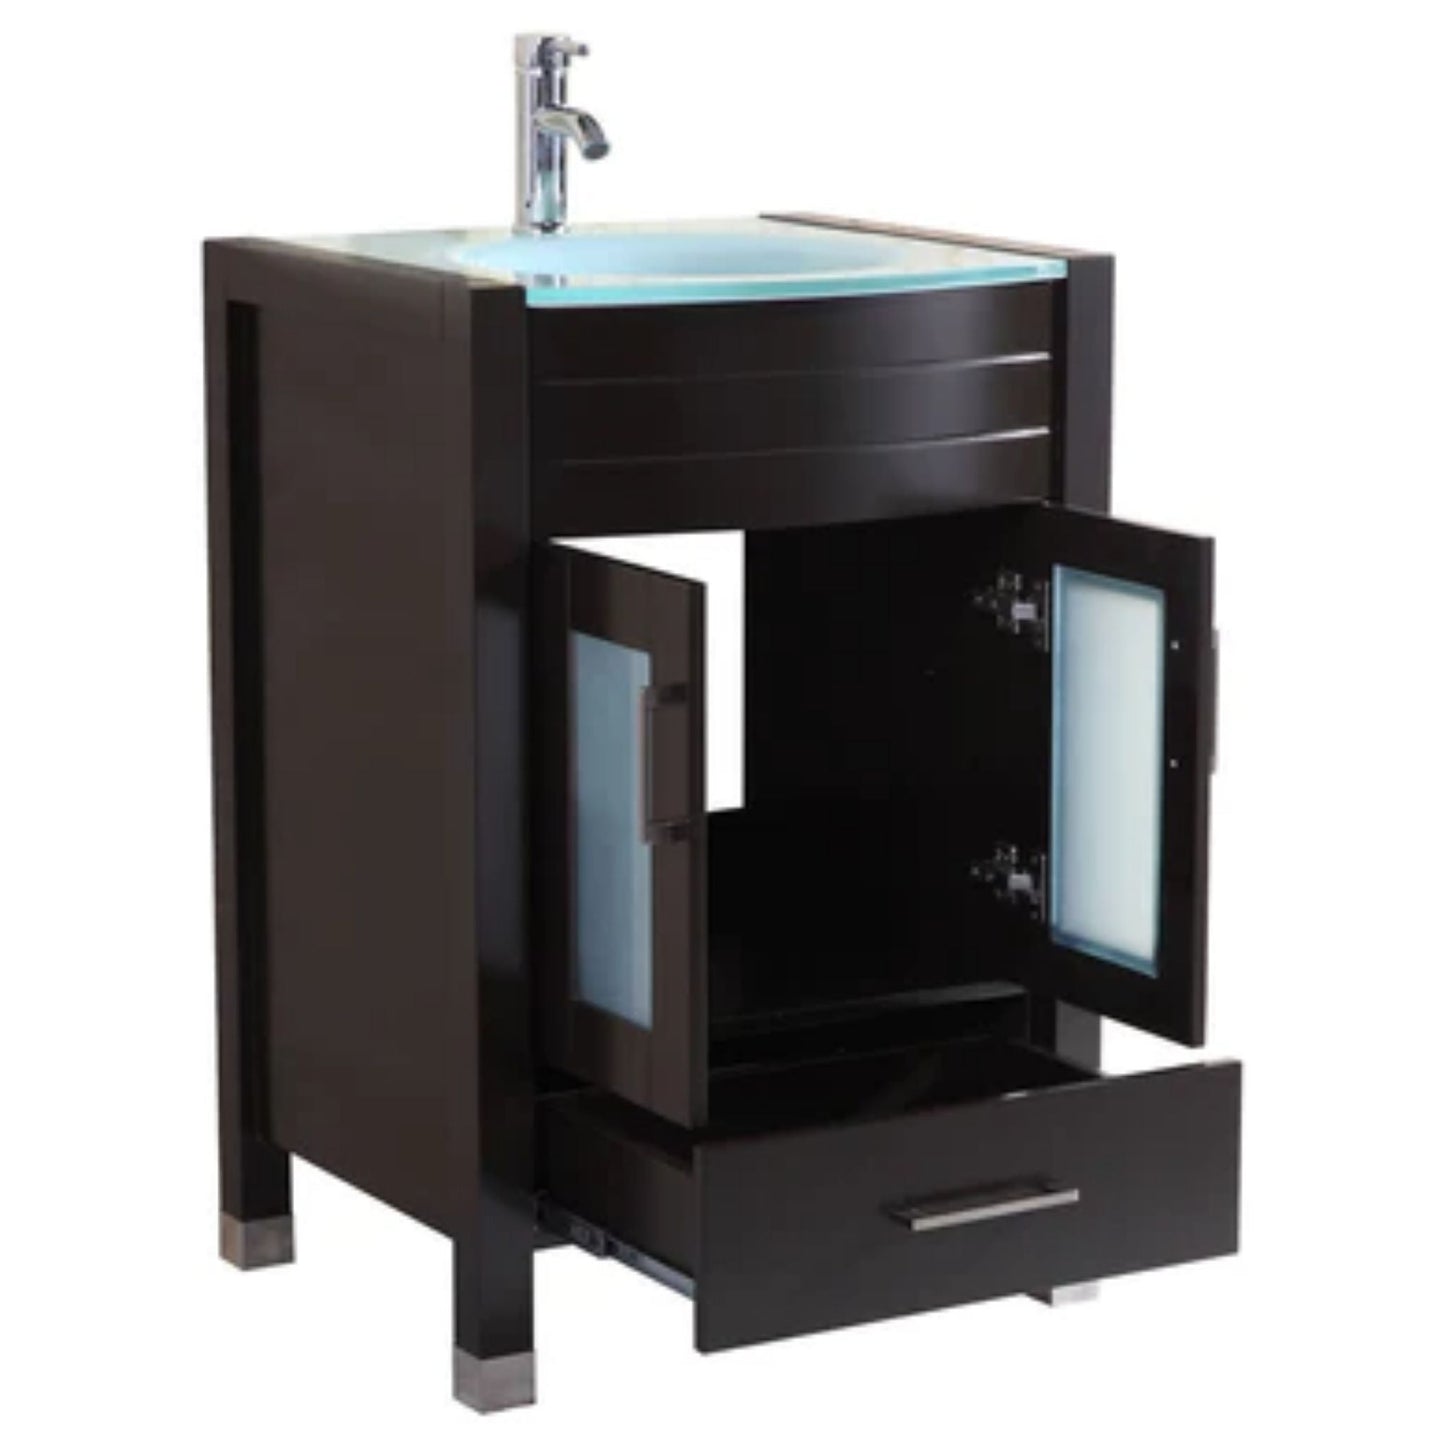 LessCare 24" Black Vanity Sink Base Cabinet with Mirror - Style 3